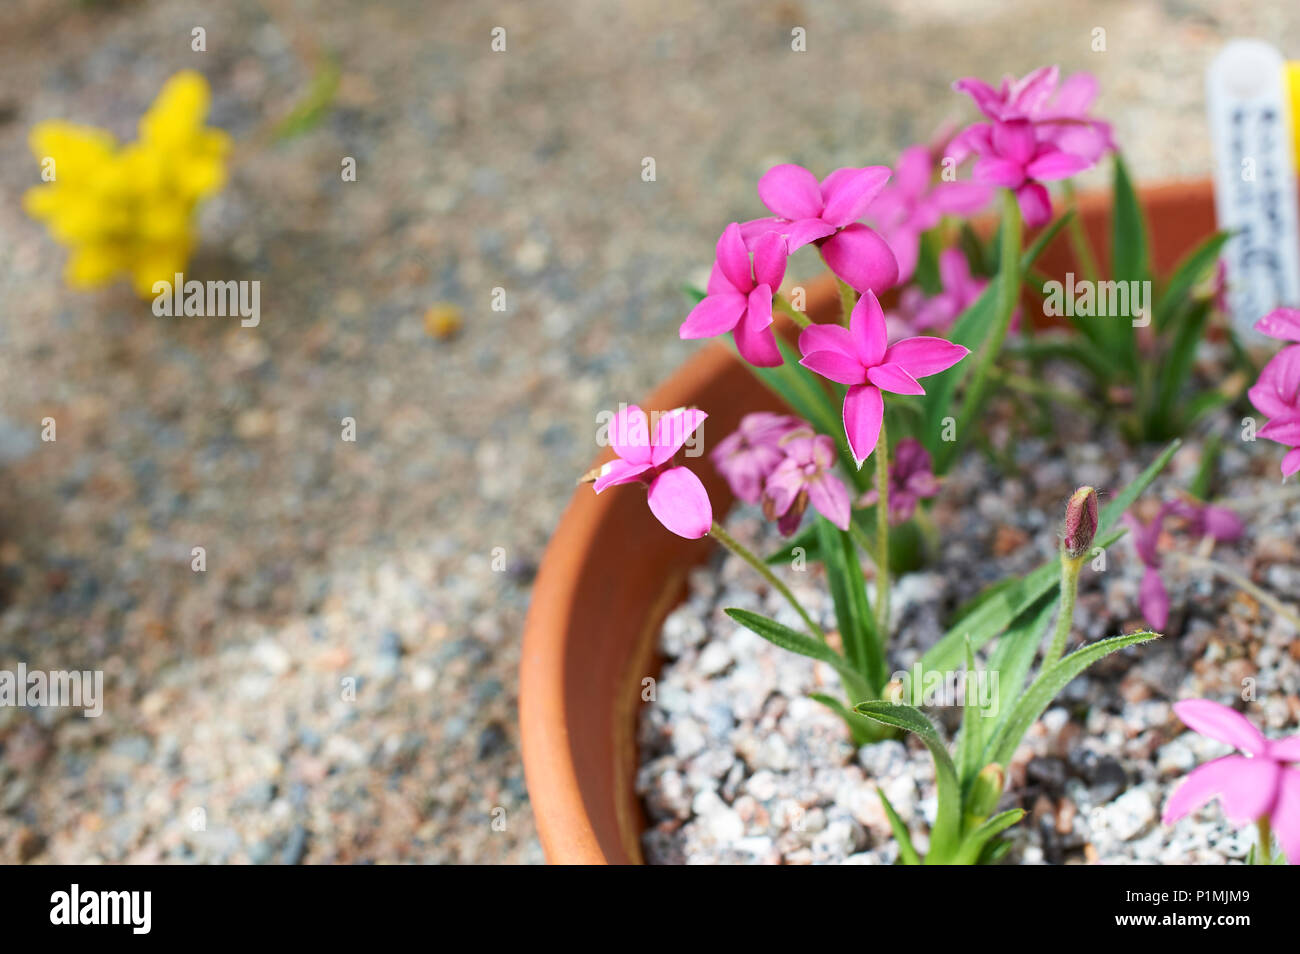 Rhodohypoxis baurii  'Albrighton' native to Southern Africa (South Africa Lesotho Swaziland Cape Province) Stock Photo